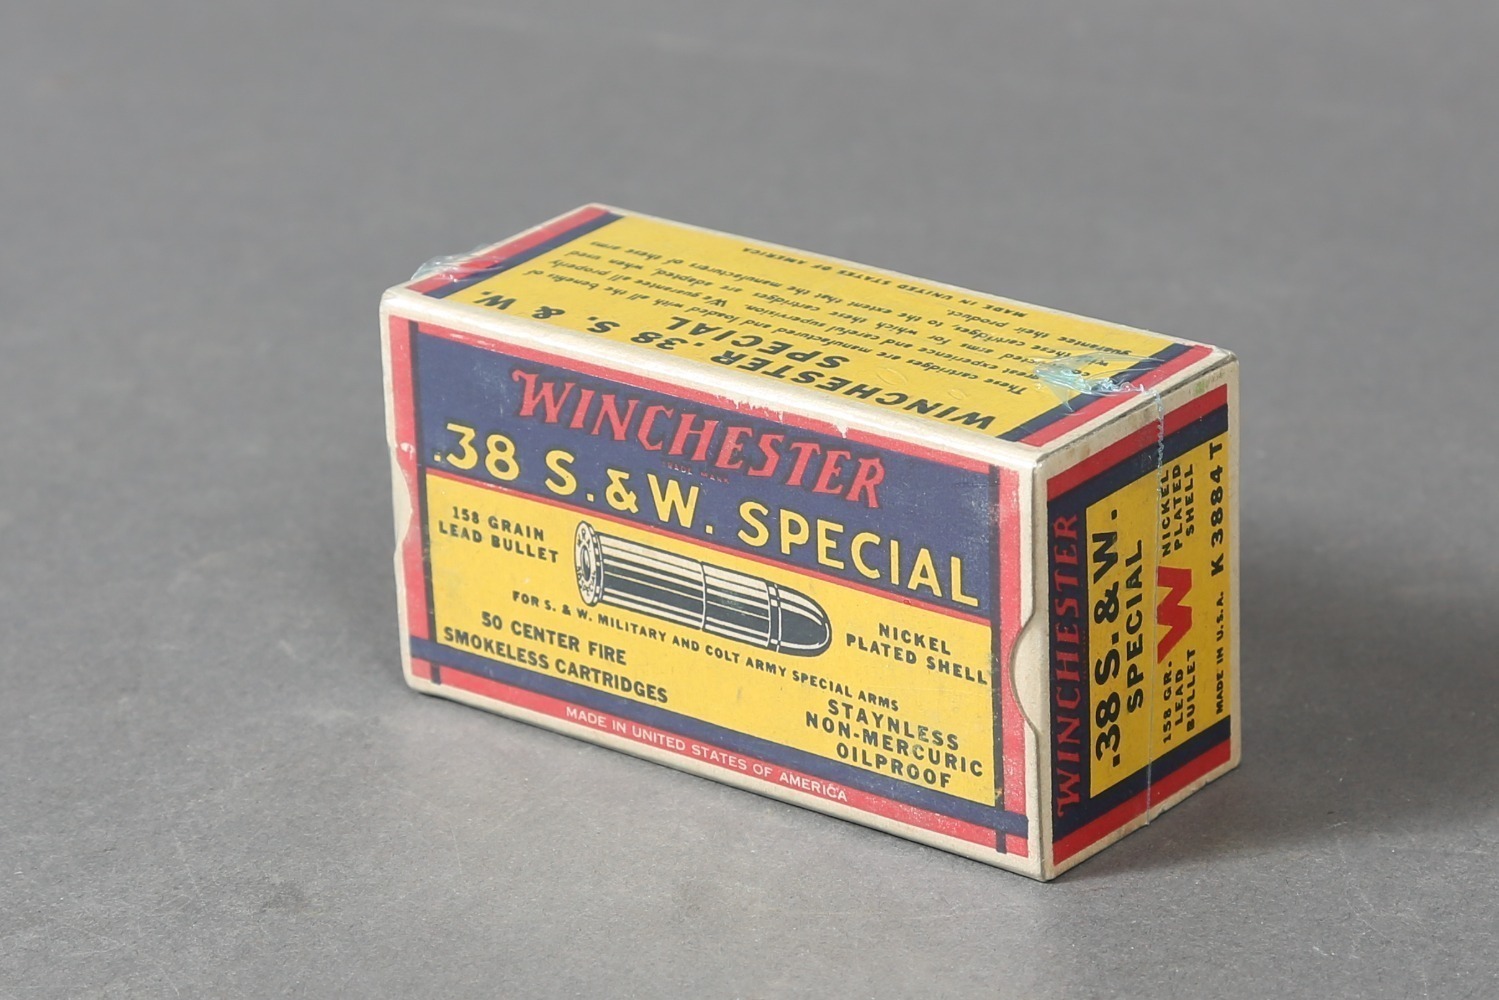 1 Bx Vintage Winchester .38 S&W Spcl Ammo